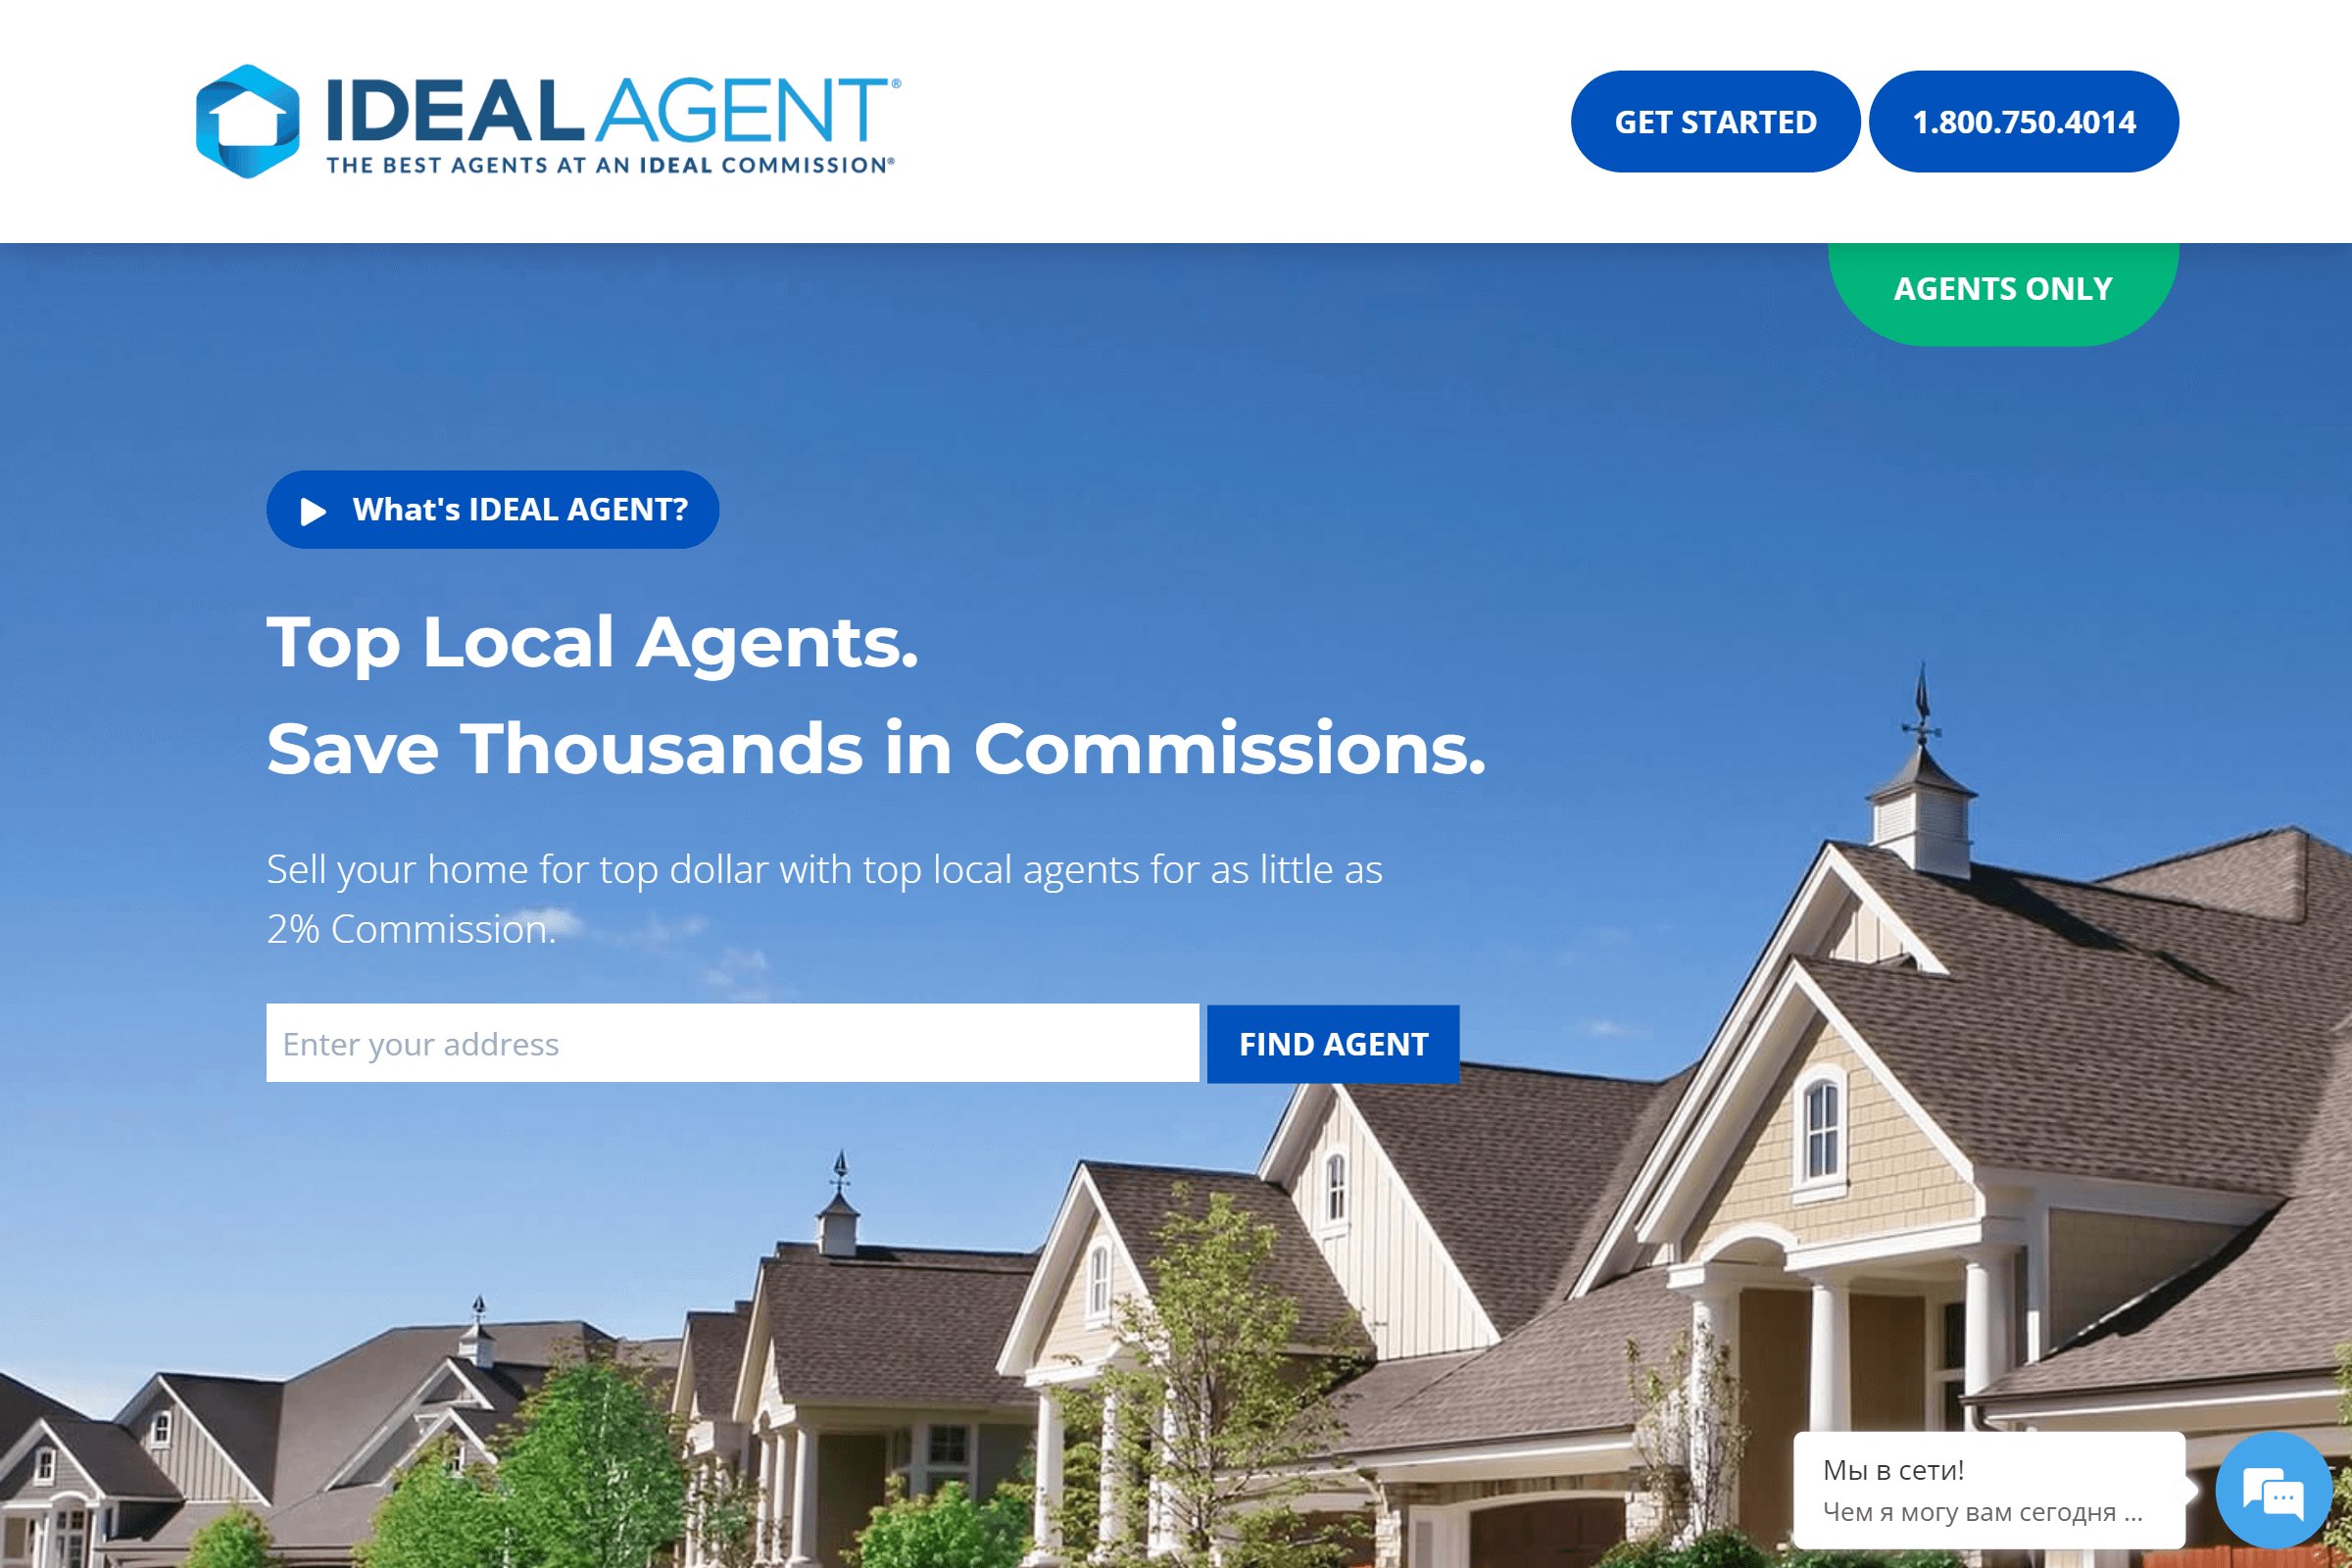 Ideal Agent on ReadSomeReviews